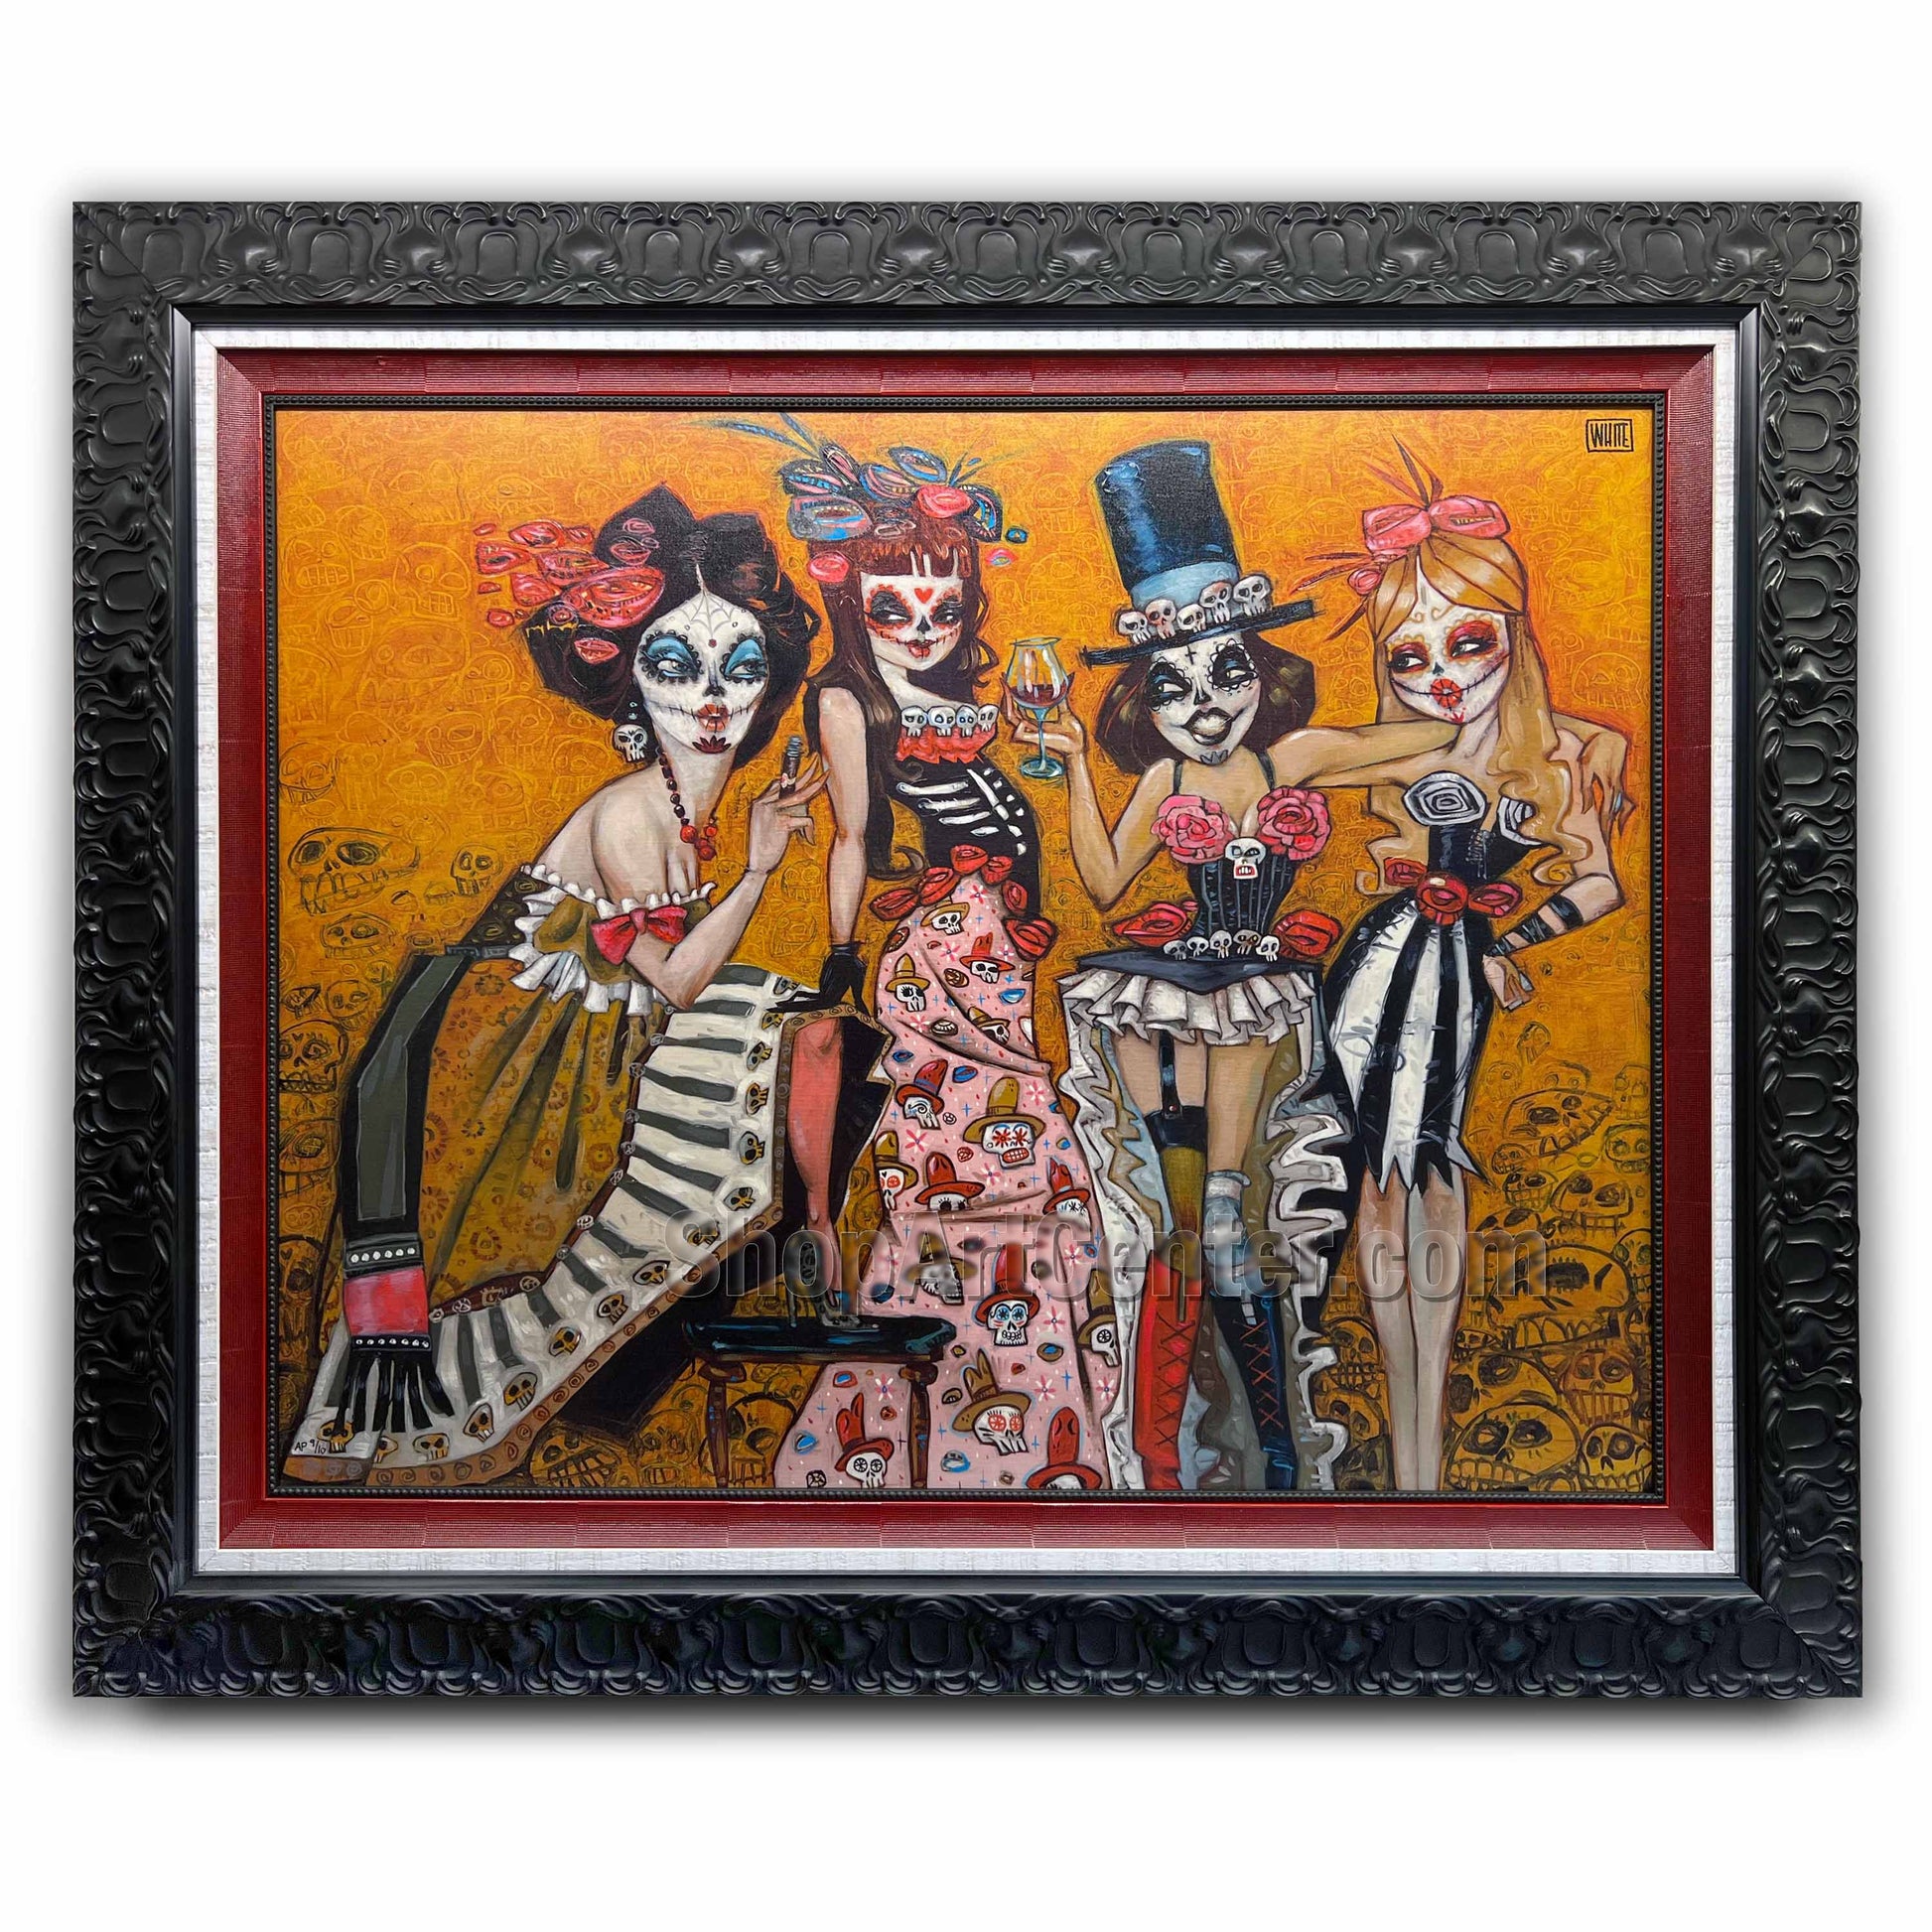 Todd White "Dead Sexy" Limited Edition Canvas Giclee